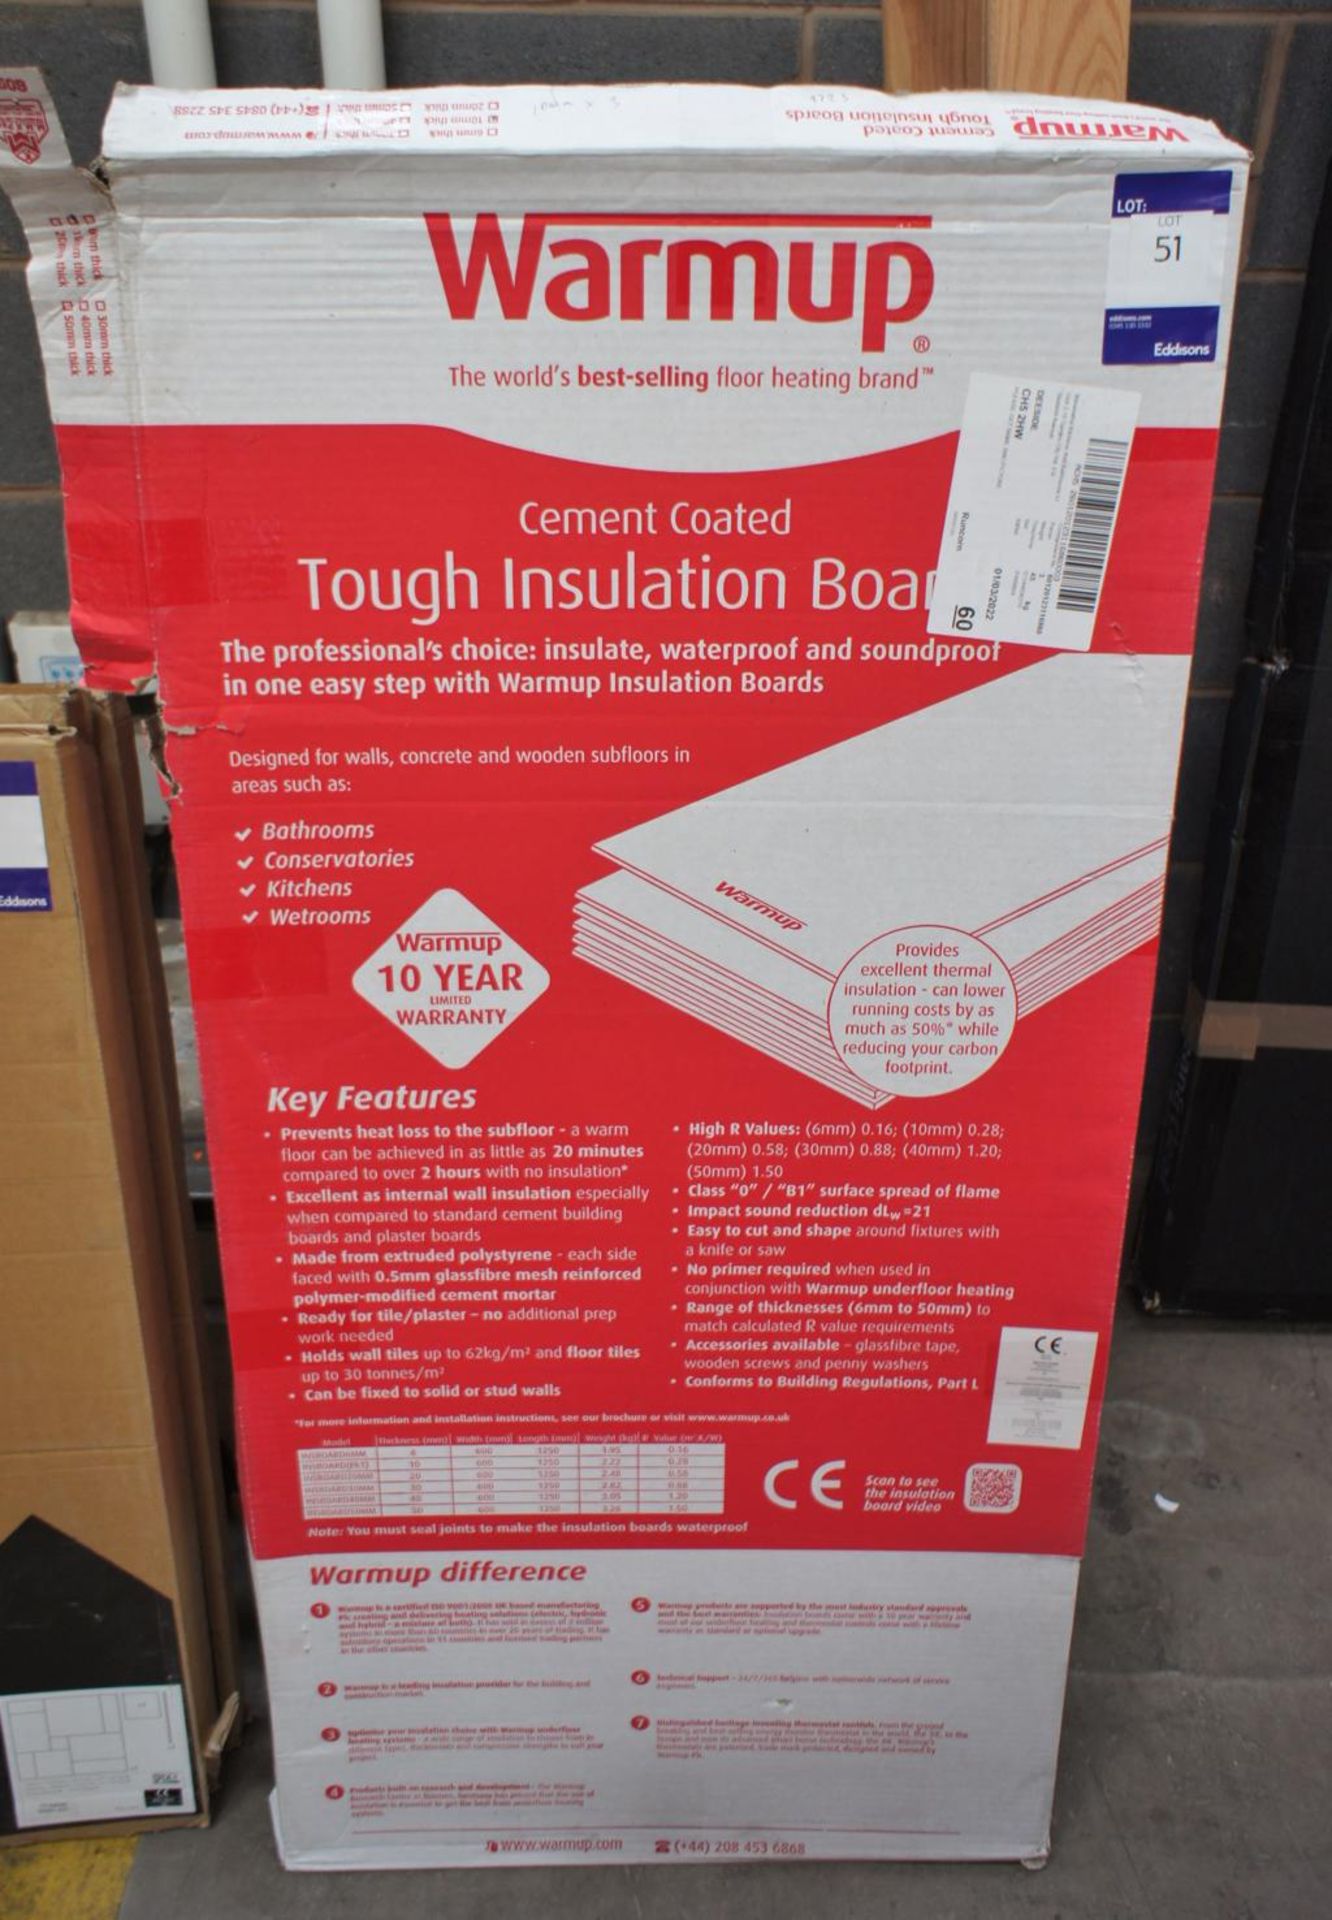 2 x Boxes of Warmup cement coated tough insulation board - Image 2 of 3